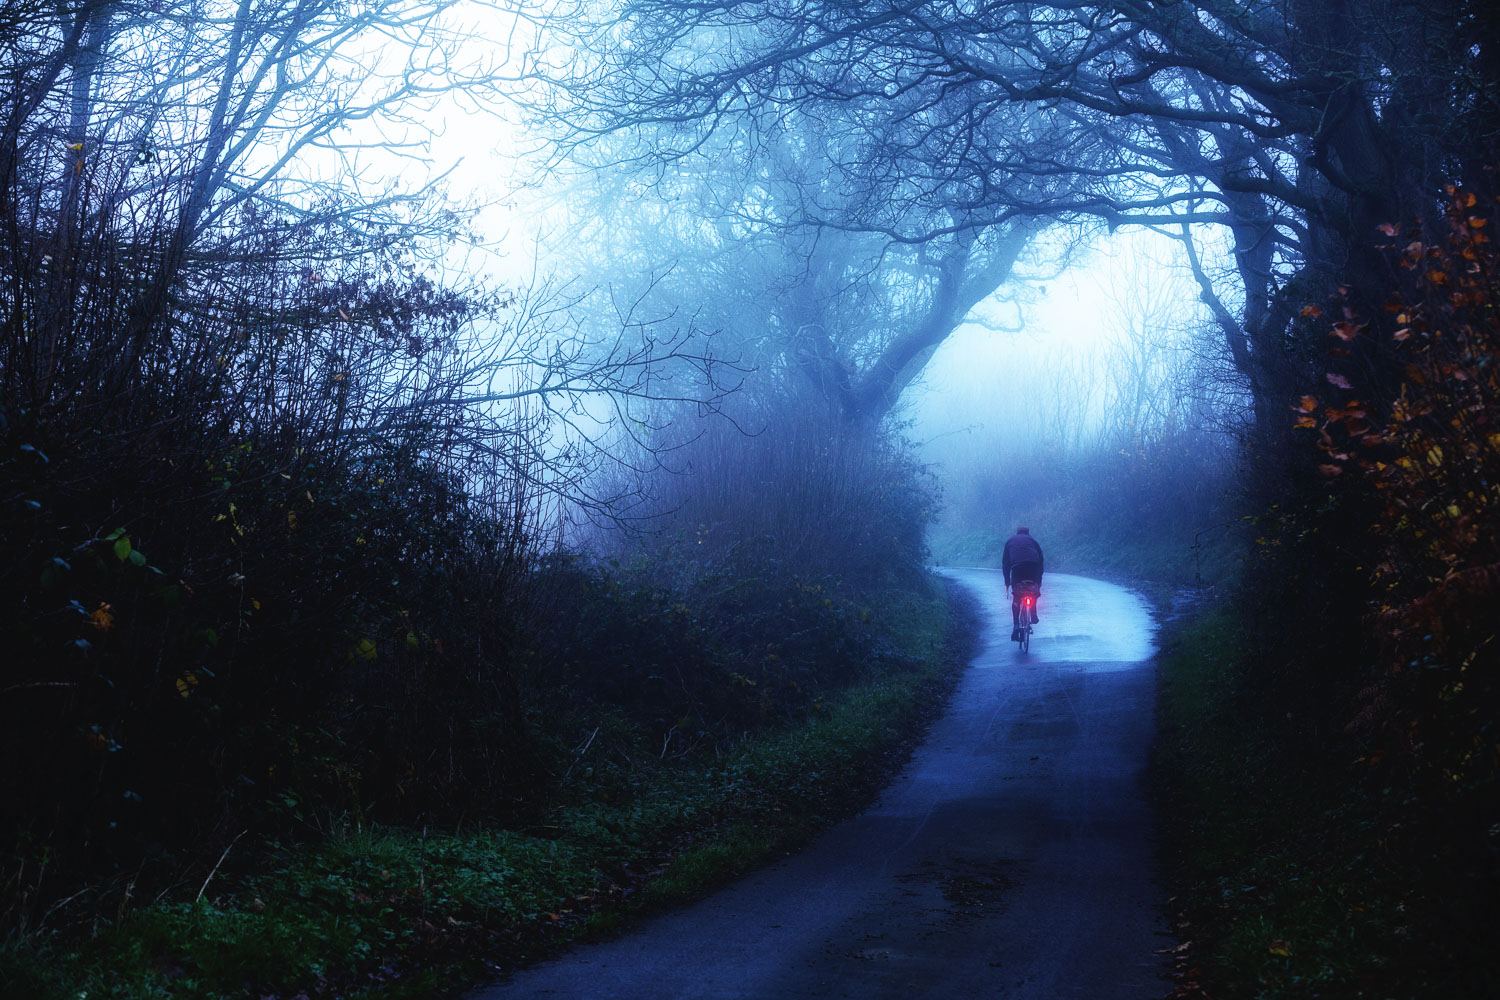 Cyclist pedalling along spooky country lane in a winter fog